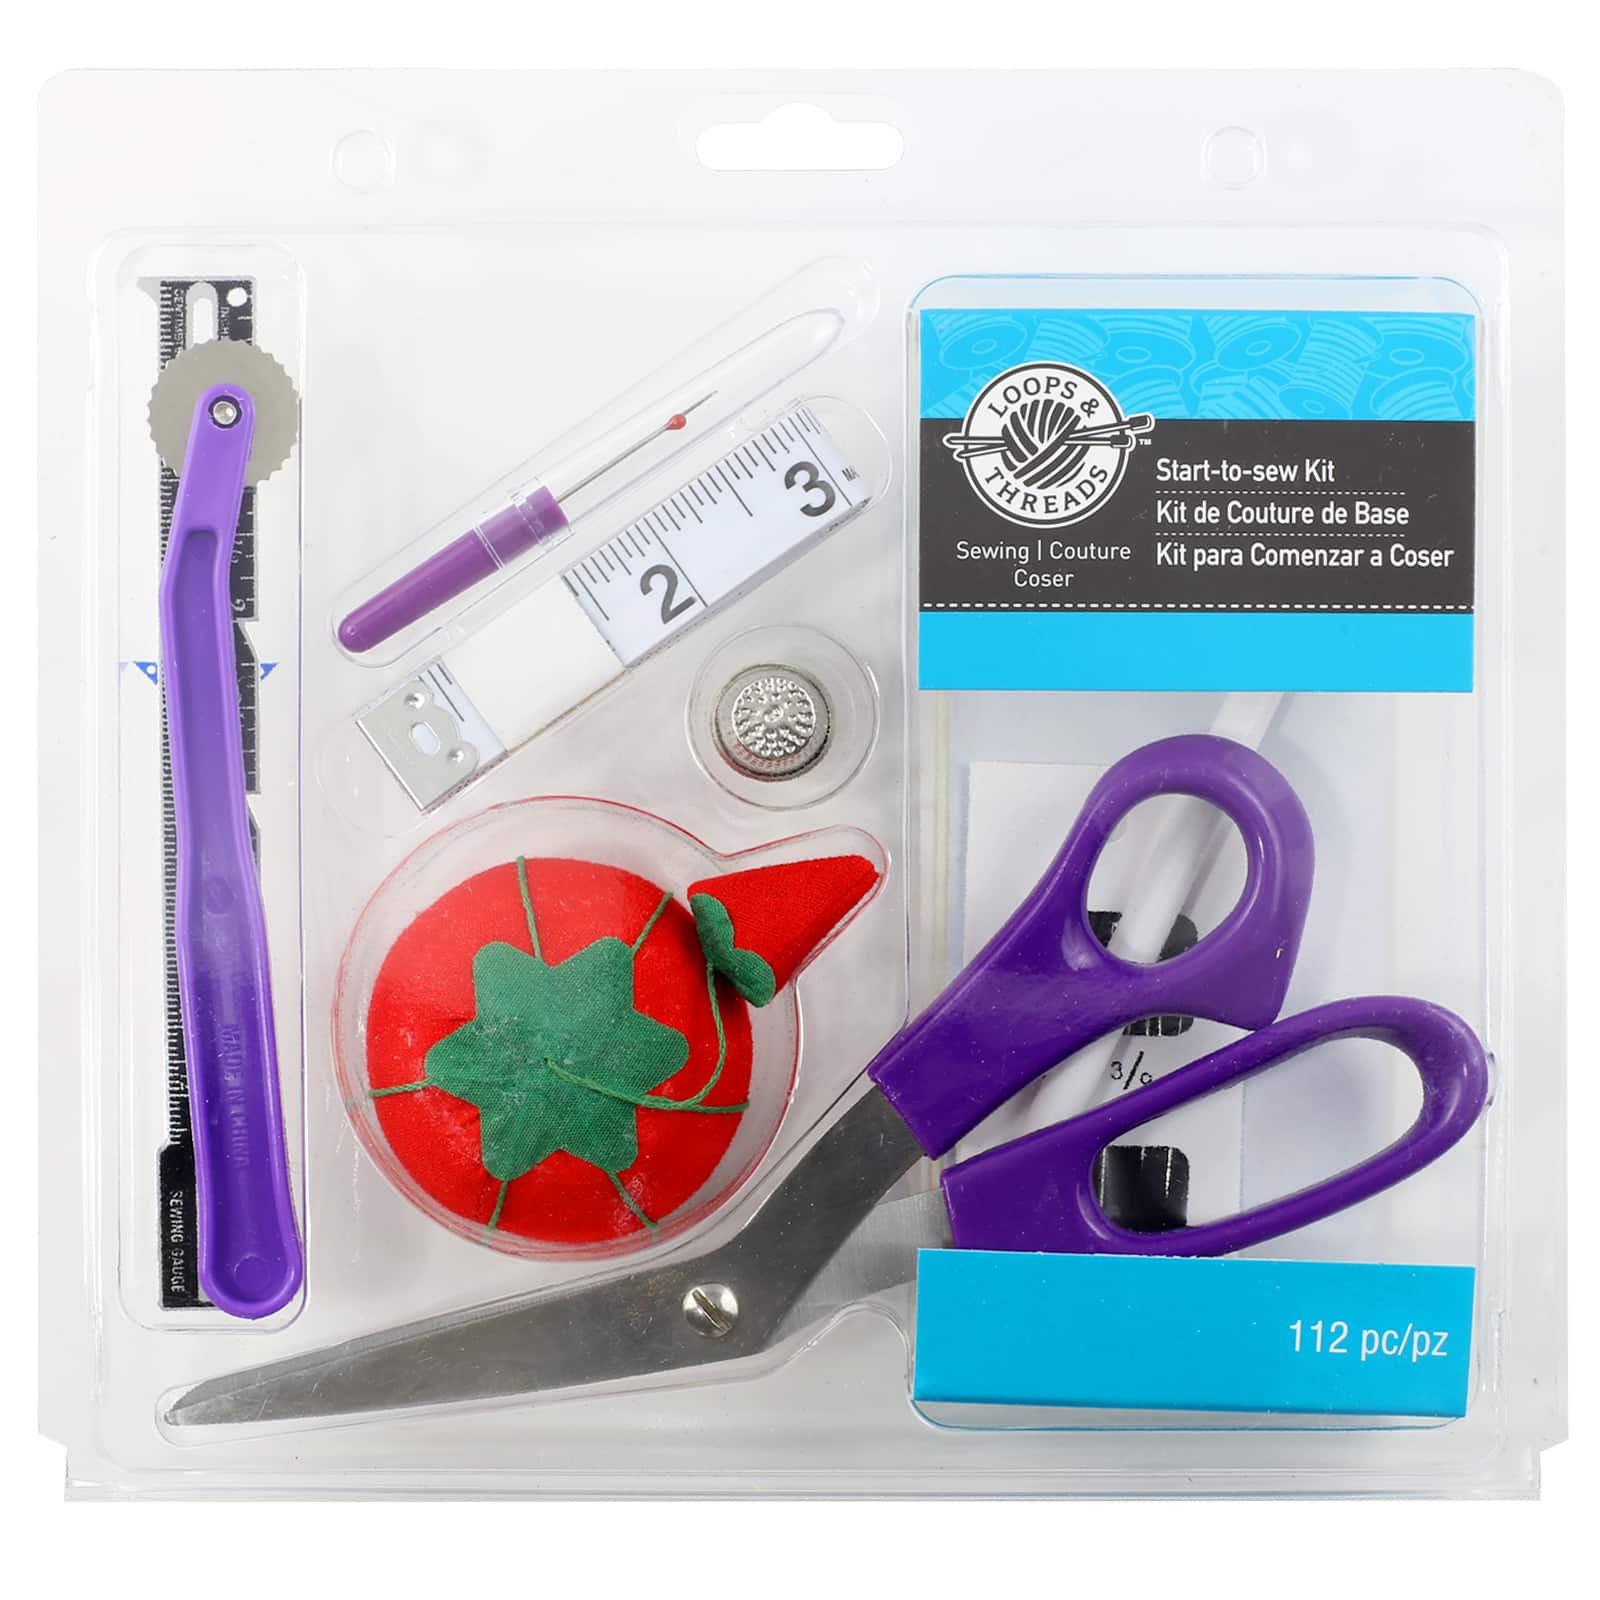 Cricut Sewing Kit: Handheld Sewing Tools for Fabric Projects